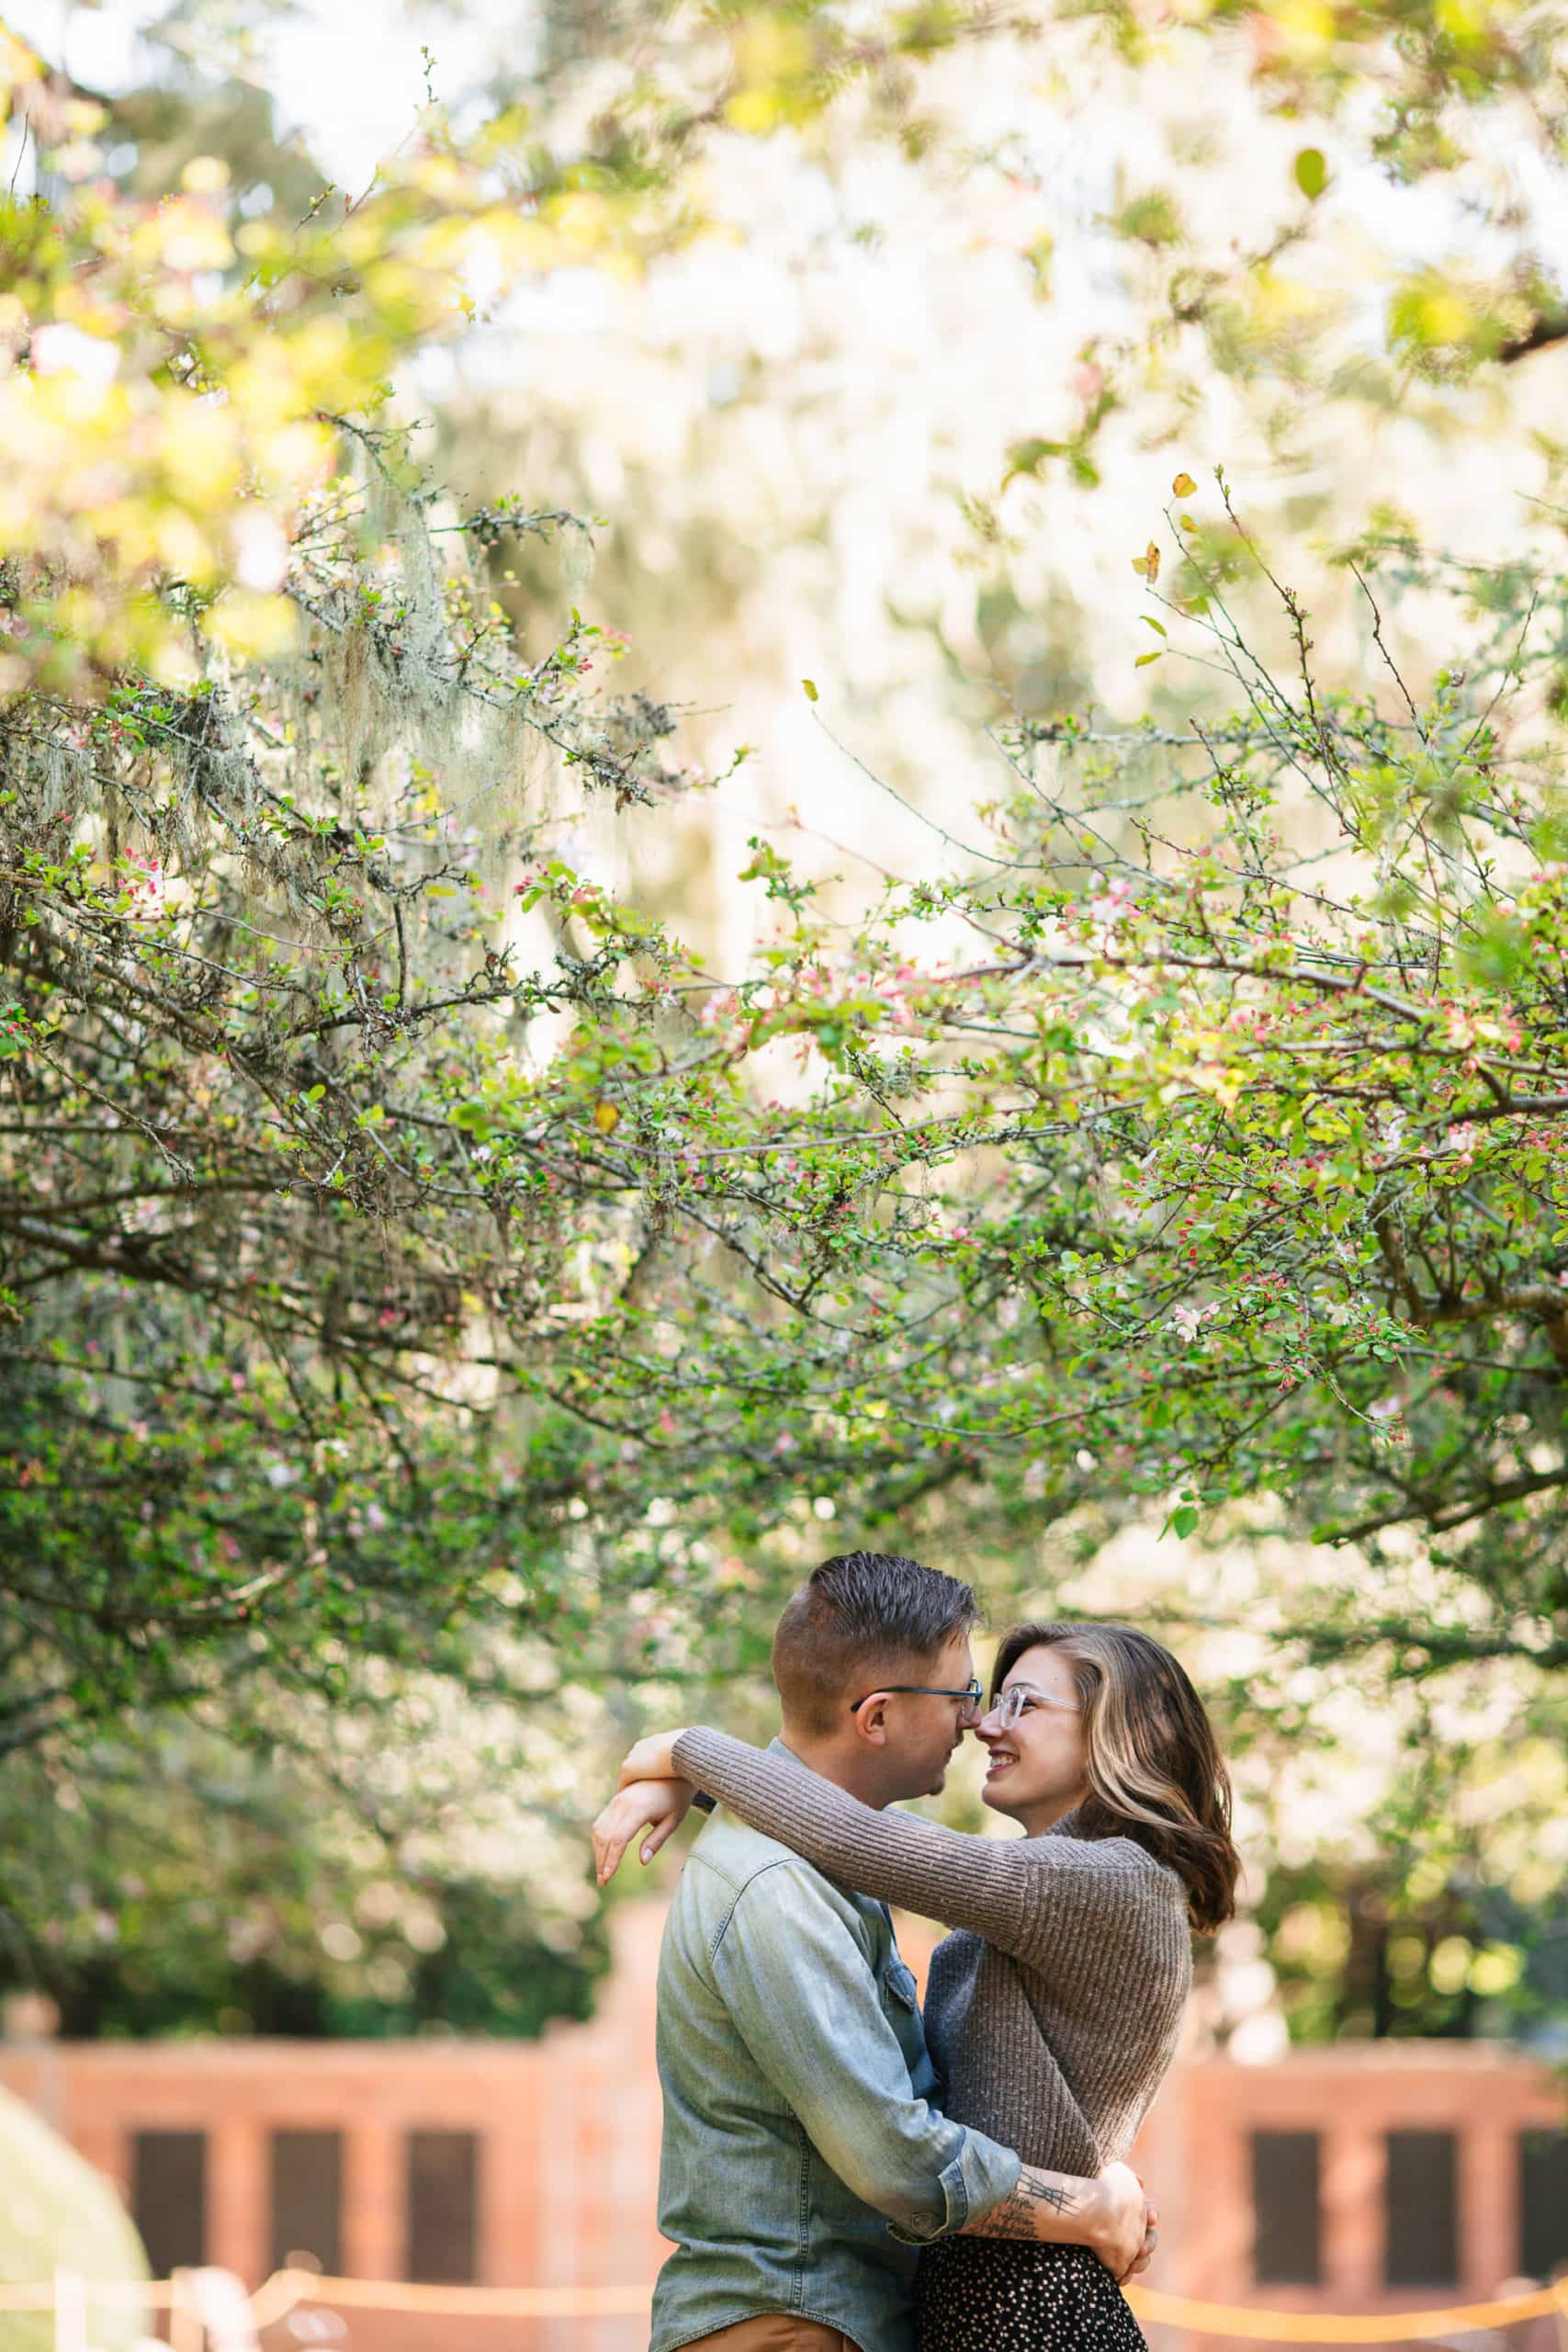 Couple embracing in front of trees and bricks in a garden